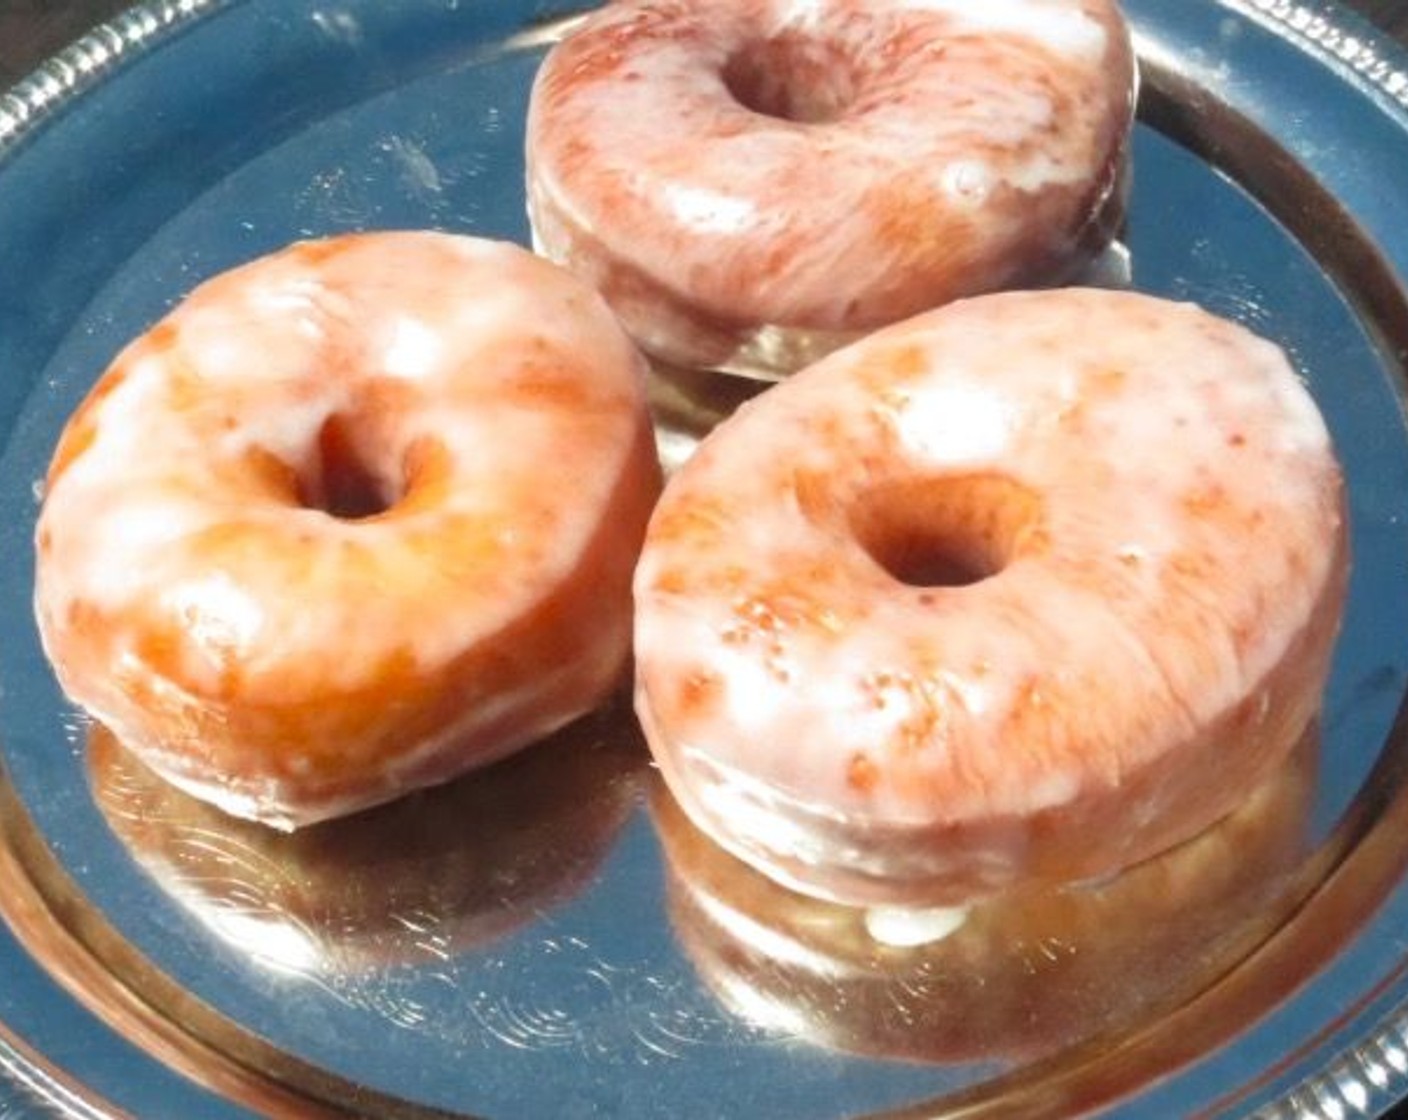 Glazed and Jam Donuts